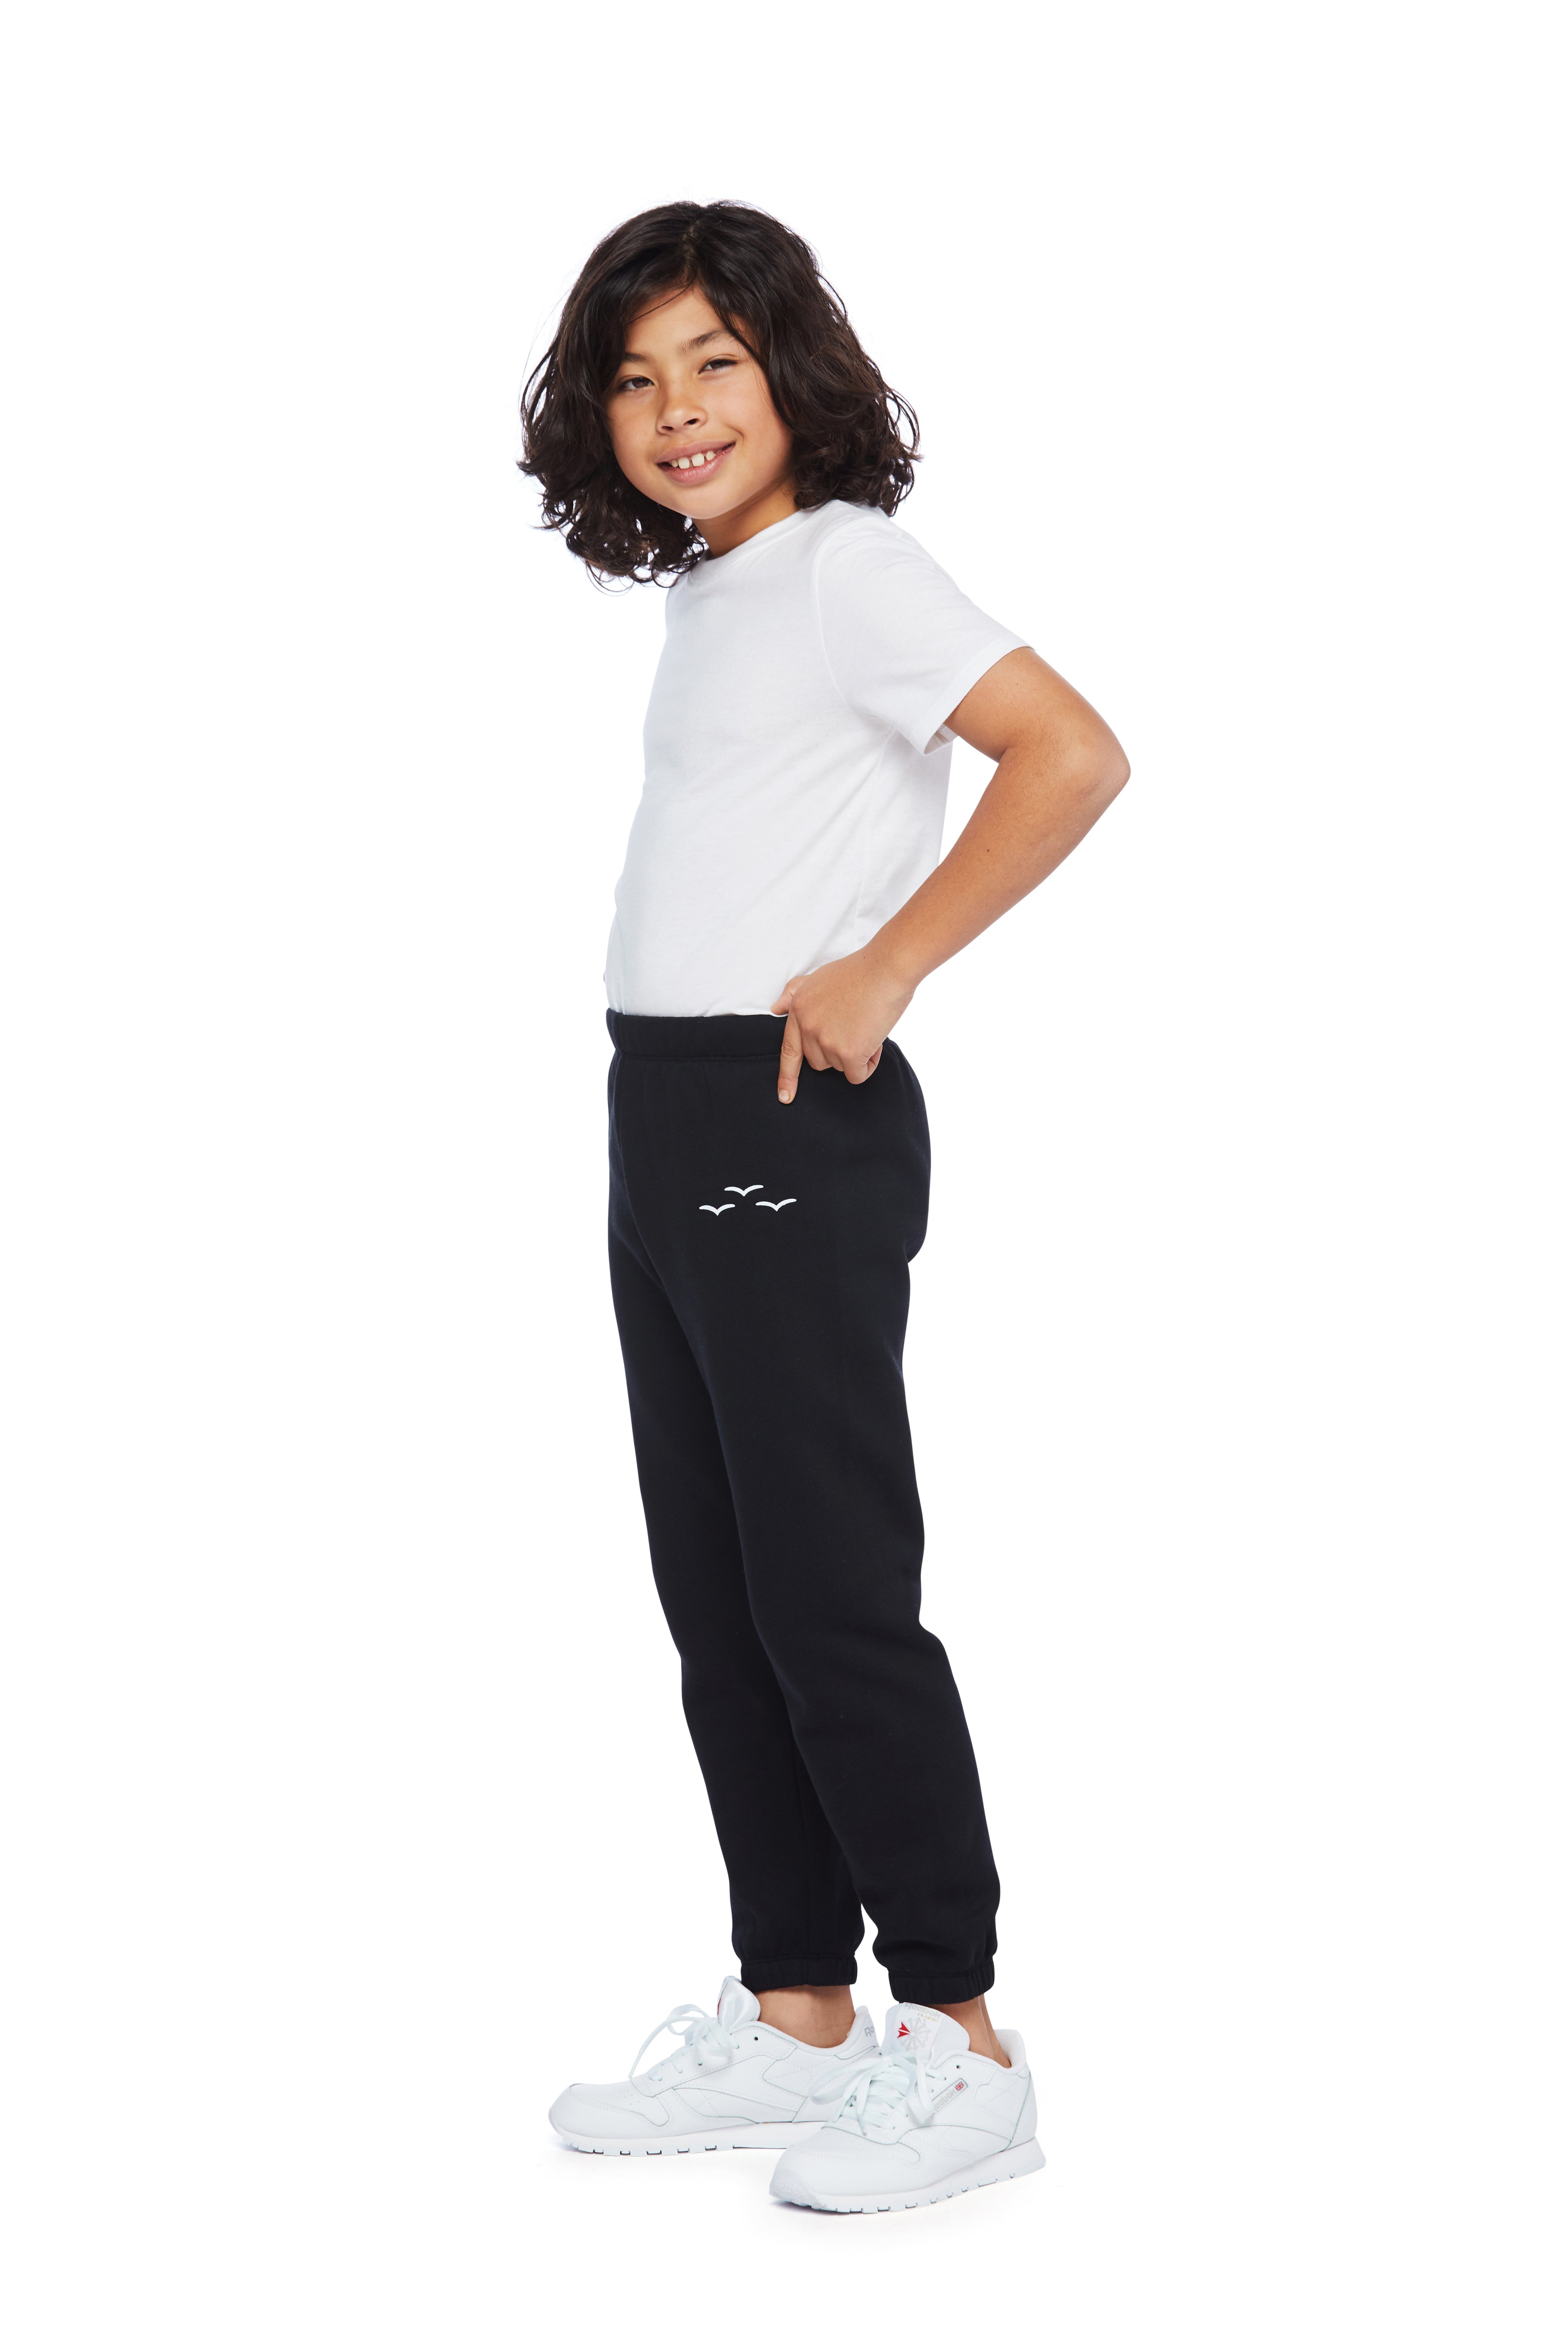 Niki Original kids sweatpants in Black from Lazypants - always a great buy at a reasonable price.